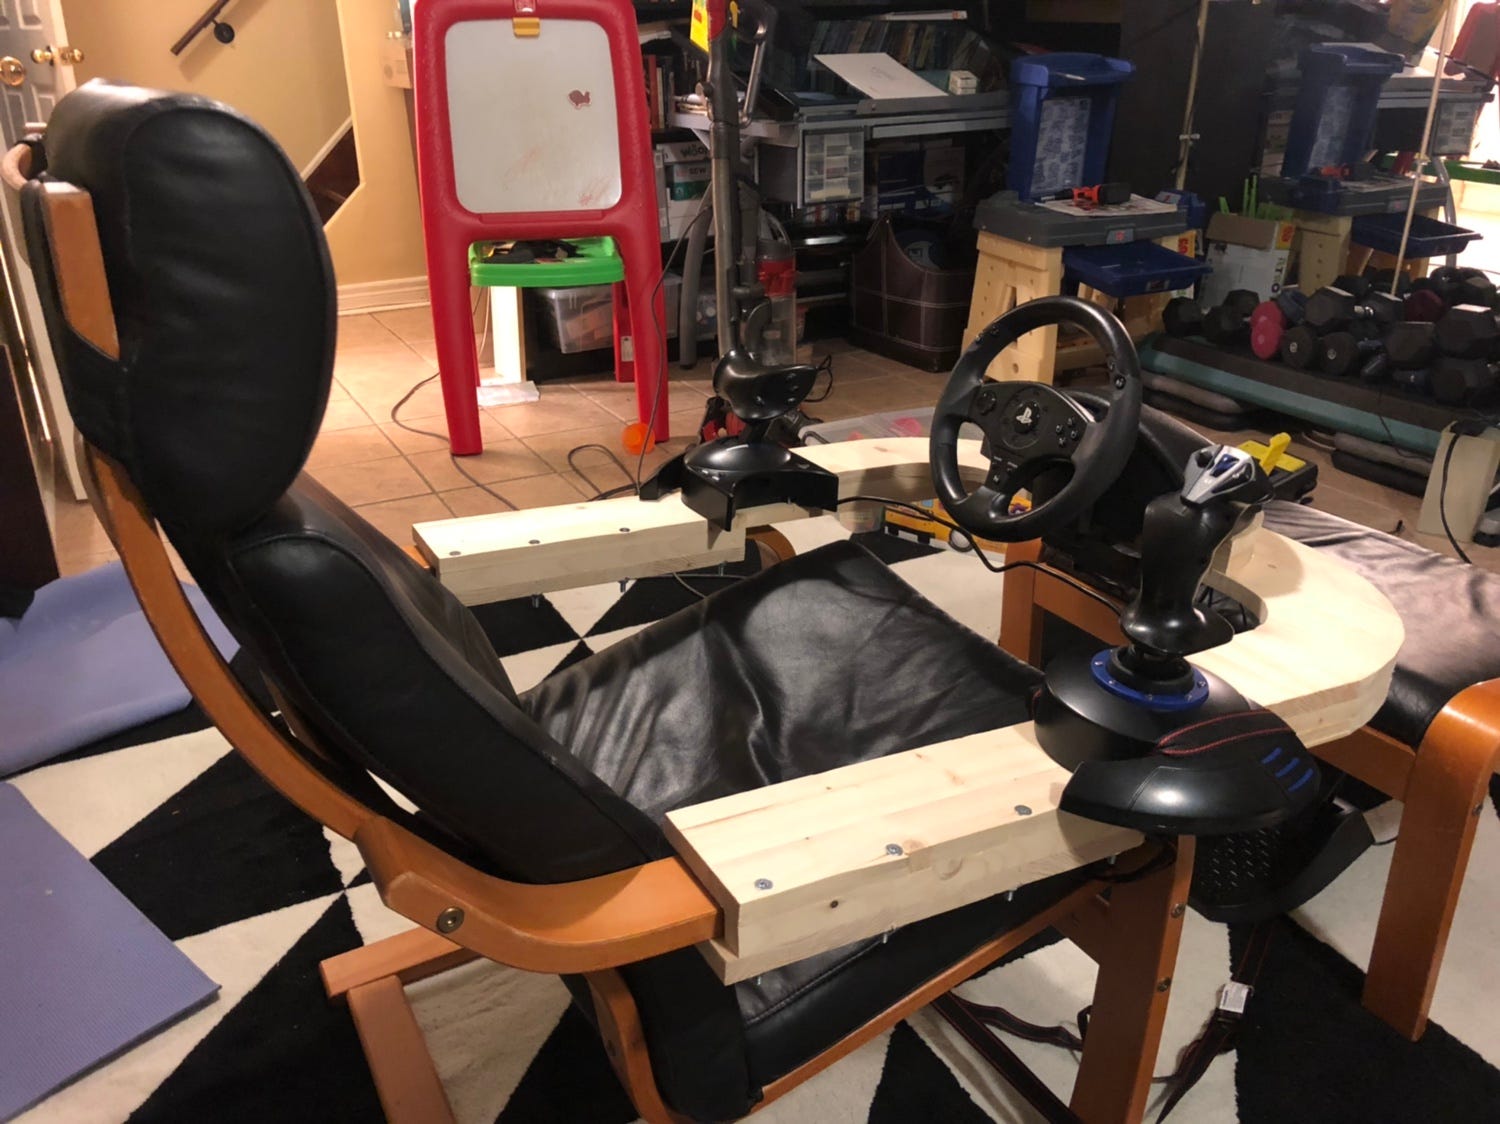 Diy Gaming Chair Build For Ps4 Driving Flight Sims By Adam R T Smith Medium